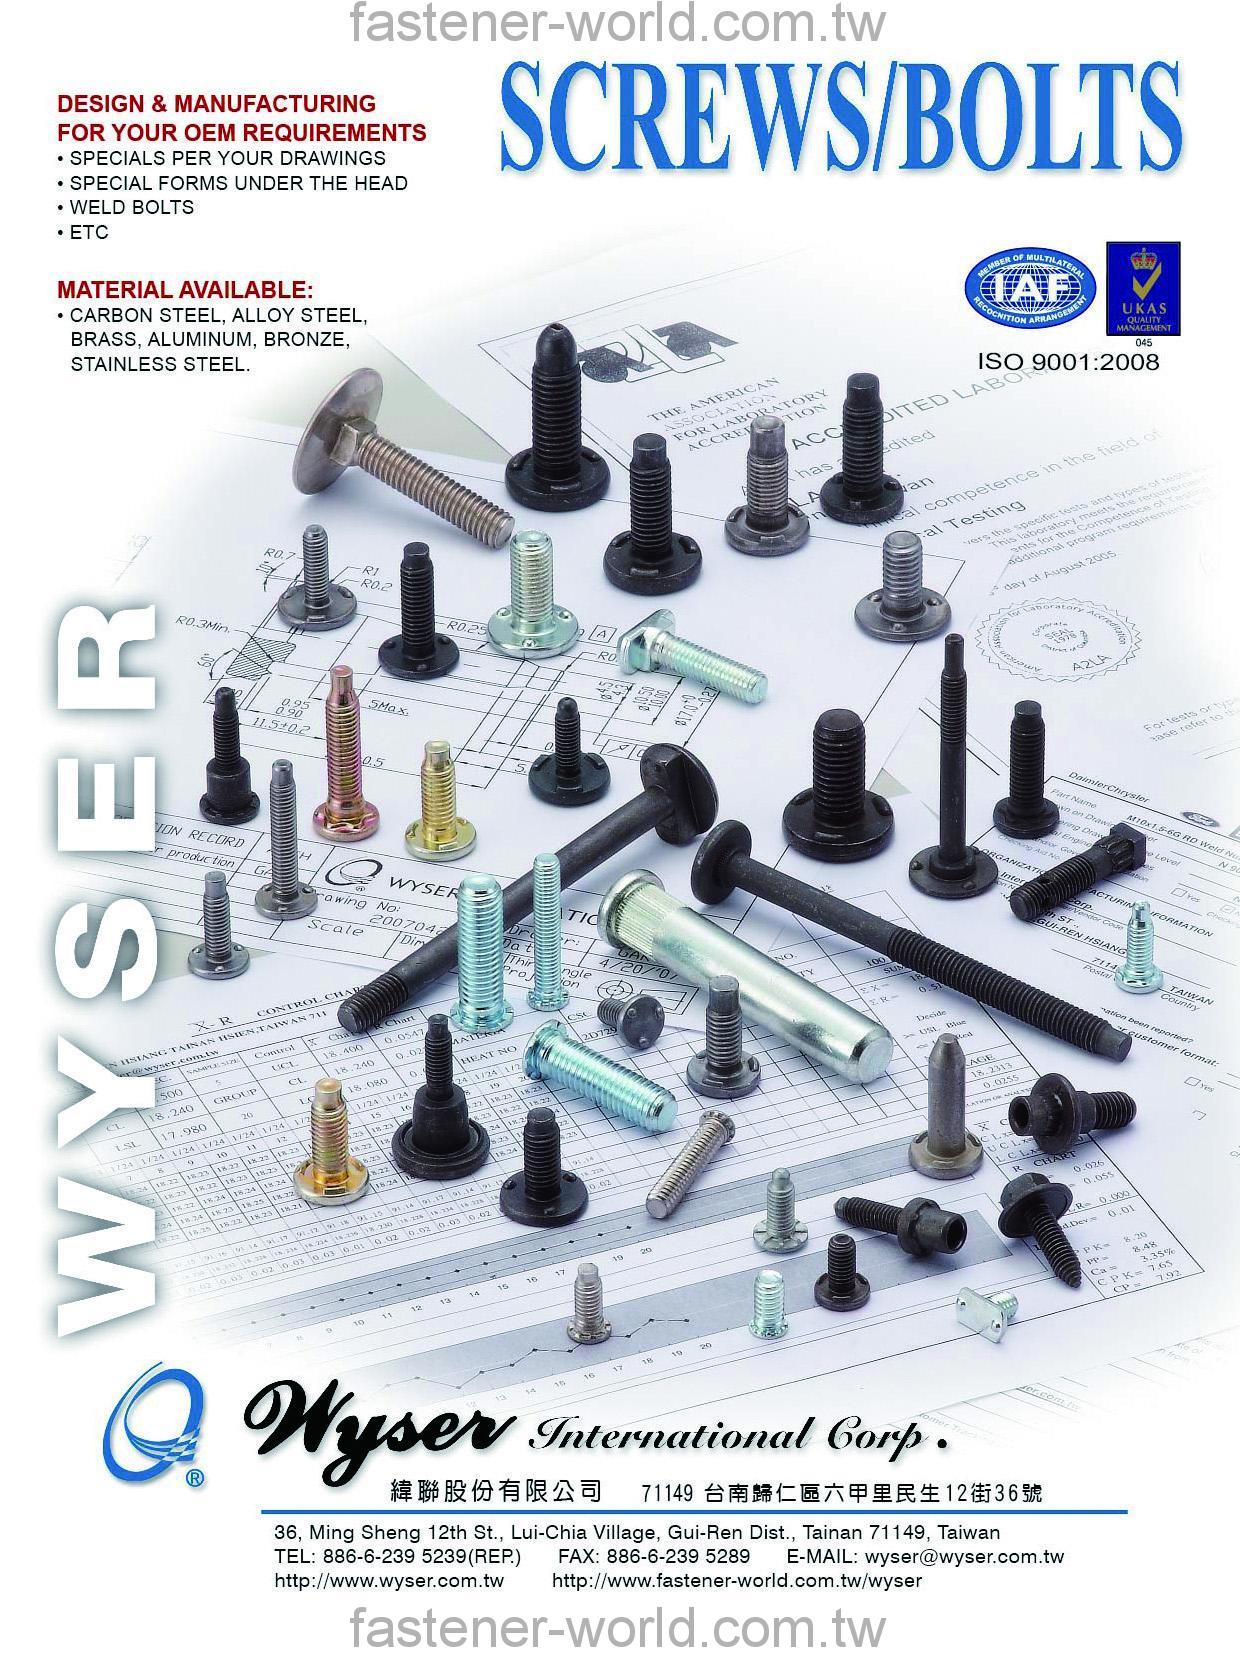 WYSER INTERNATIONAL CORP.  Online Catalogues